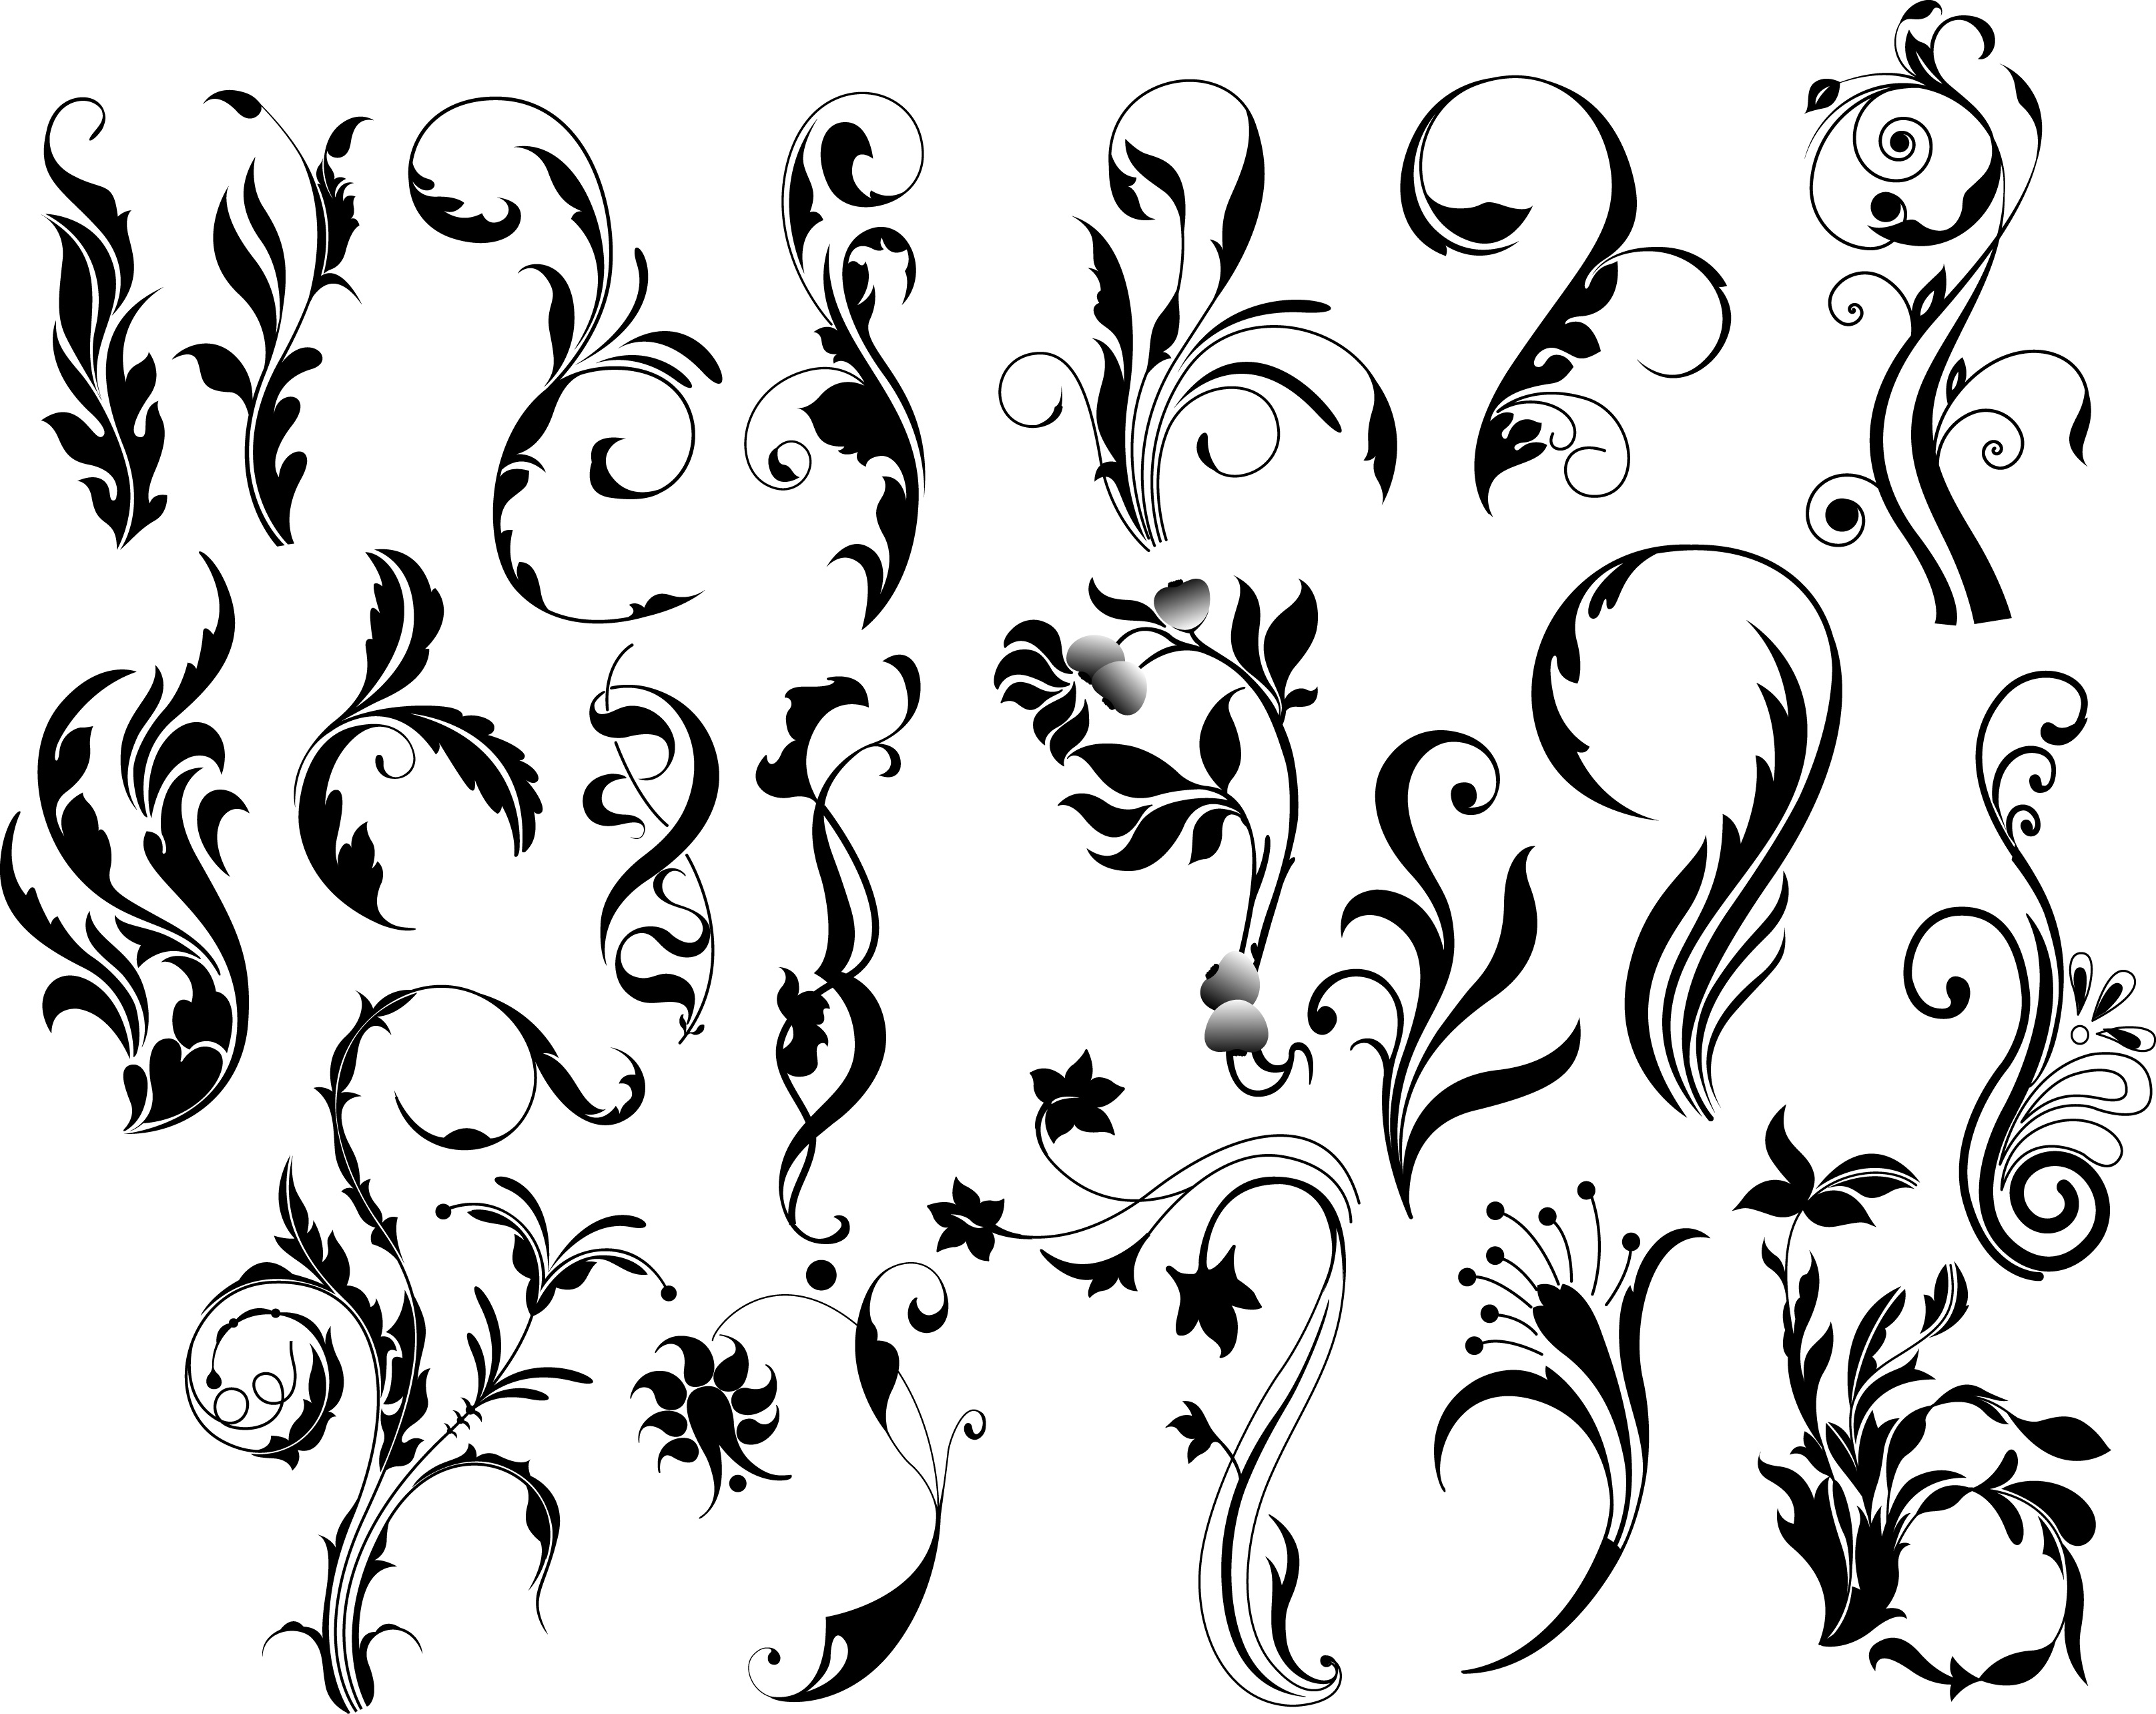 19 Vector Flourish Designs Png Psd Images Blue Abstract